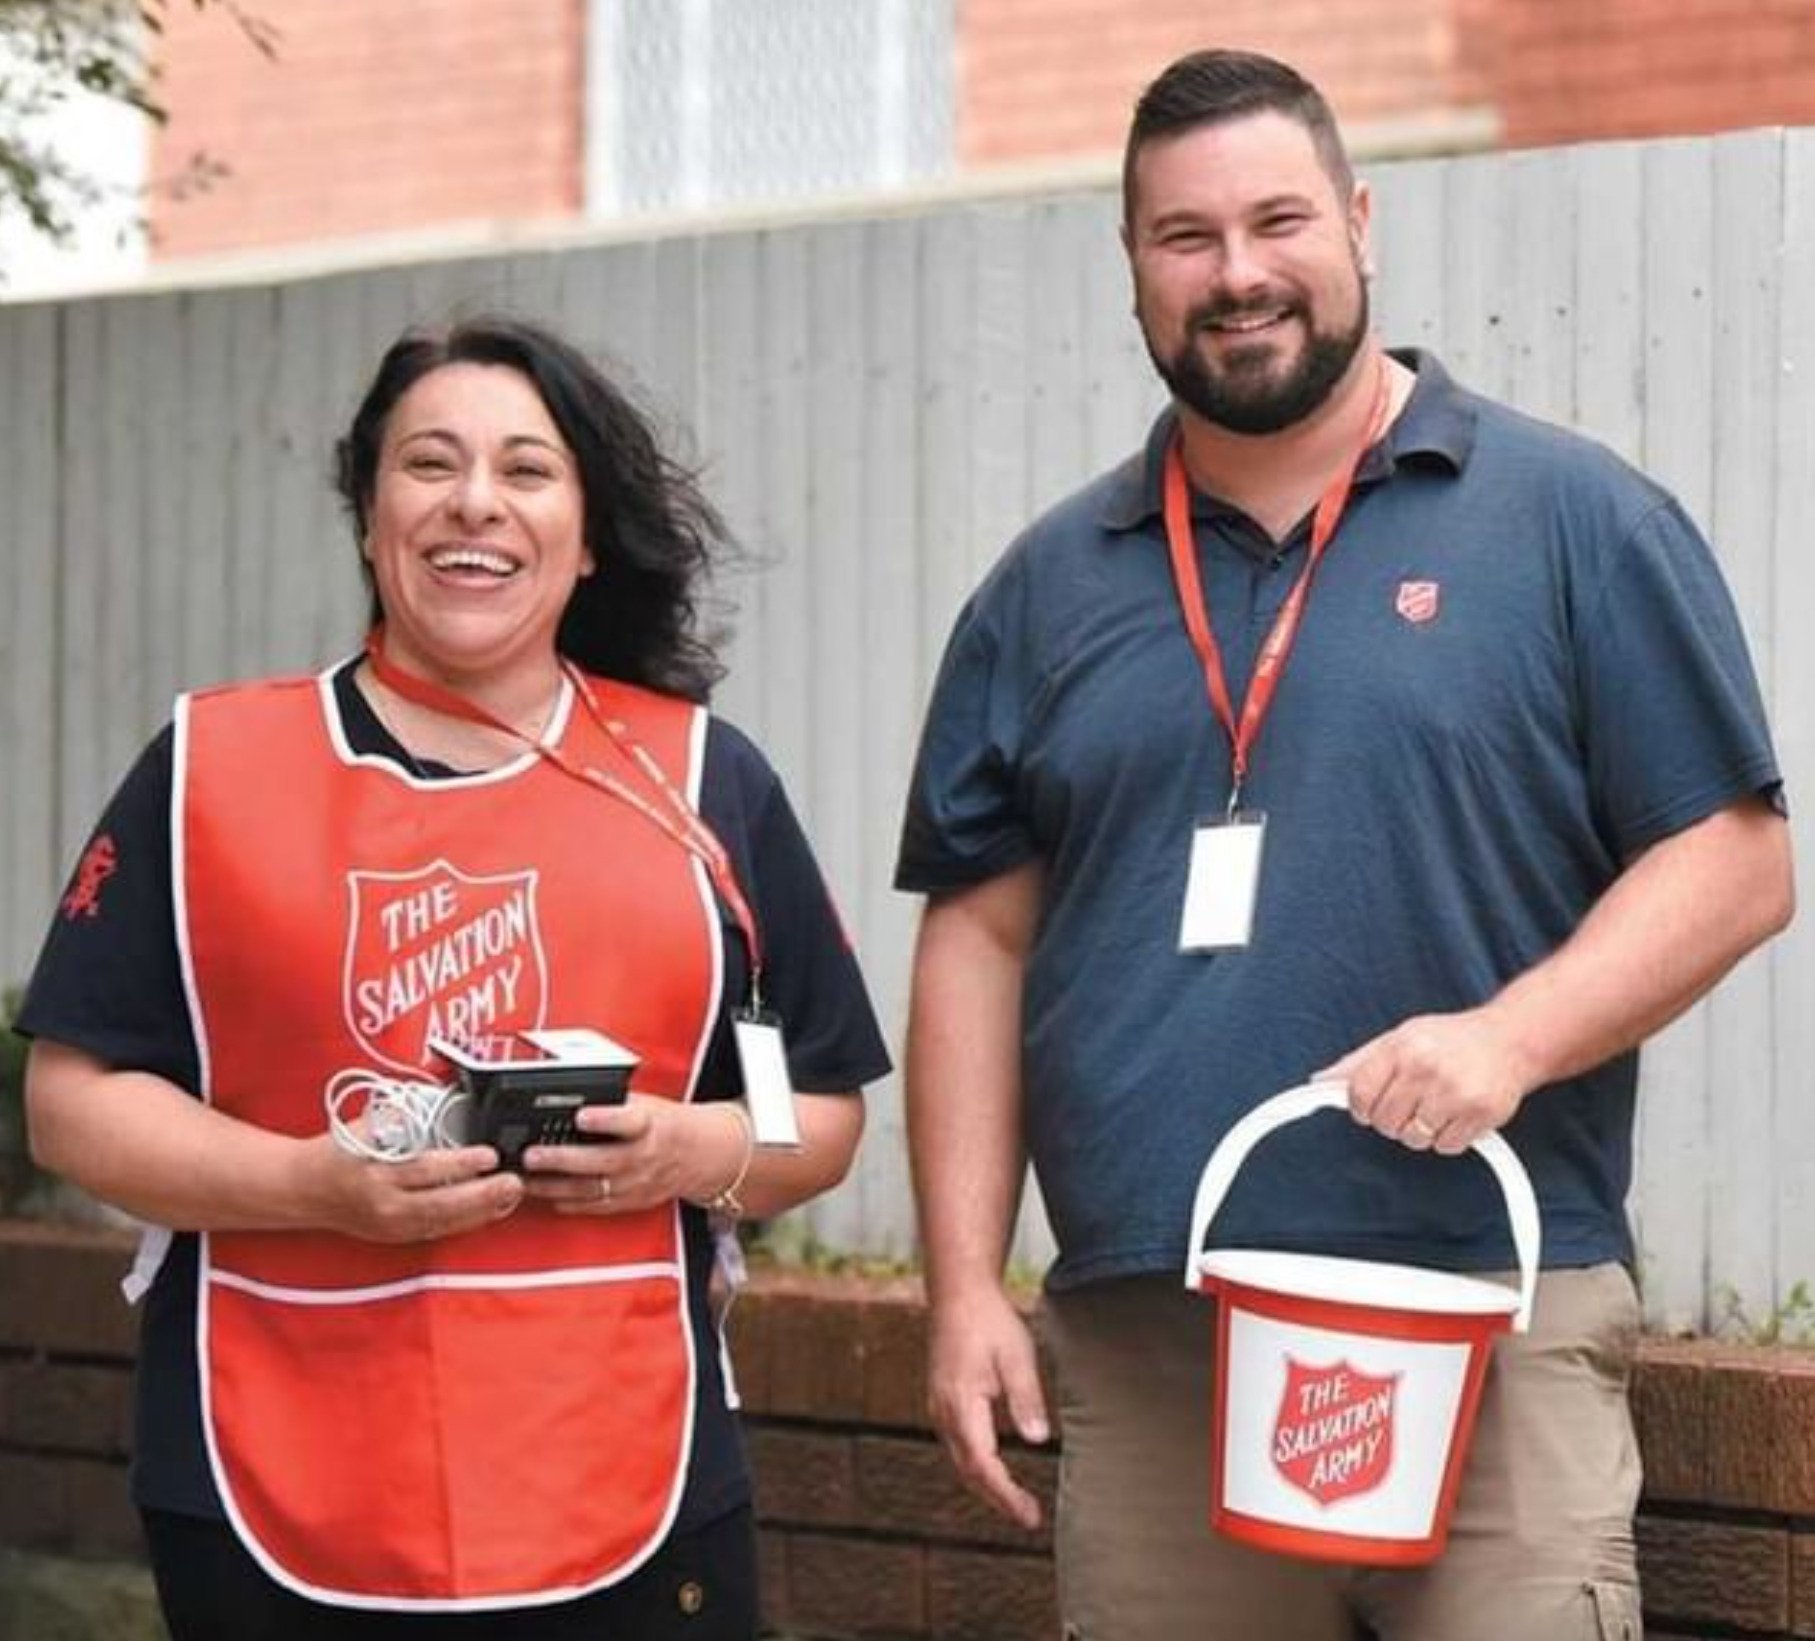 salvation army and brisbane smiles